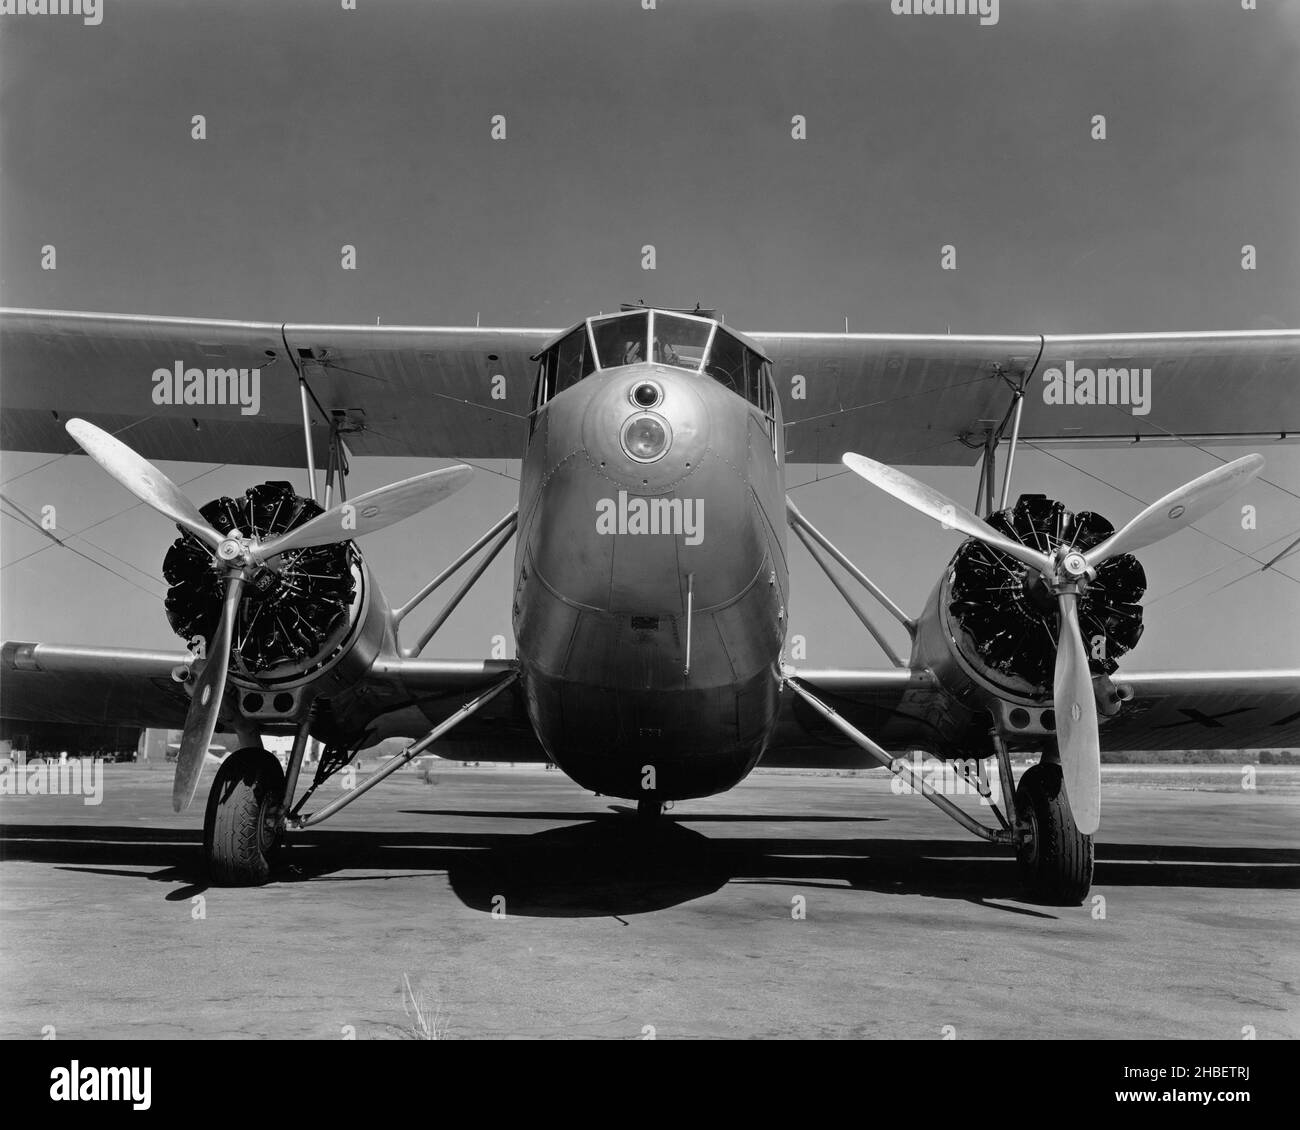 Curtiss CT-32 Condor II on the tarmac. Used by US Army for transport & as a bomber Stock Photo